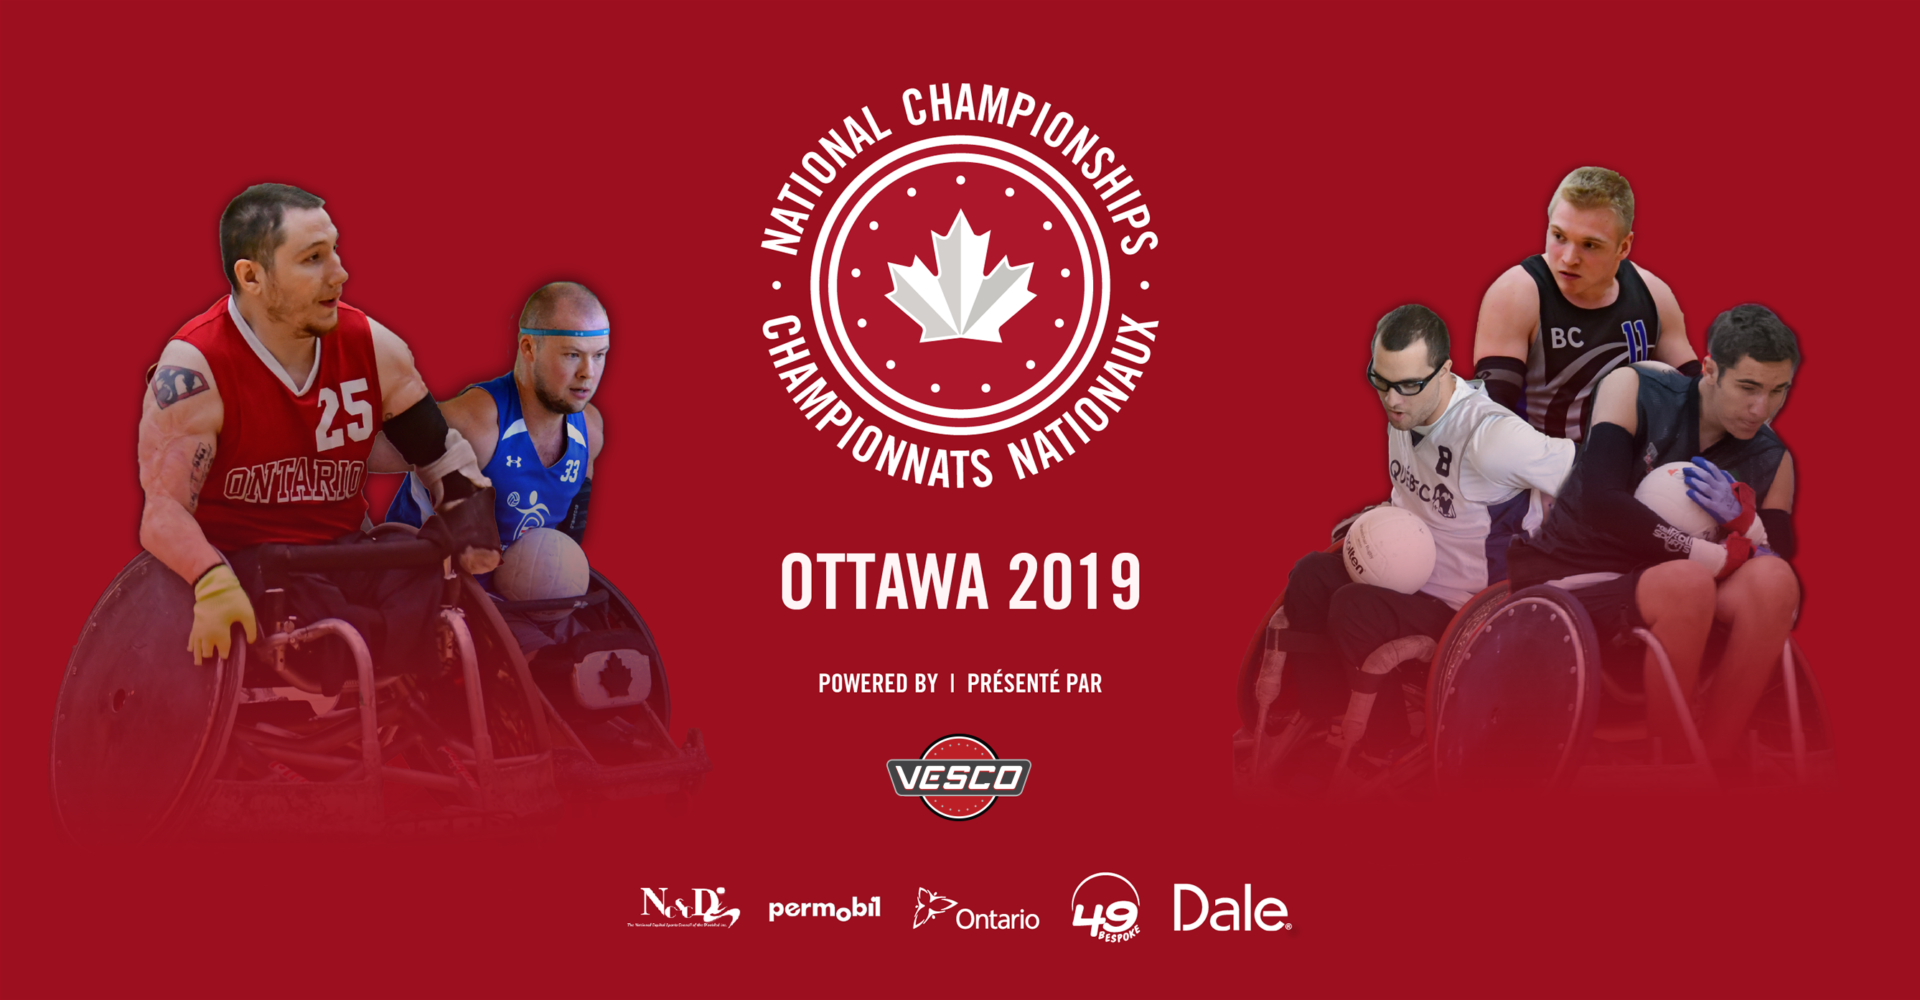 Schedule and Rosters Announced for the 2019 National Championships Powered by Vesco